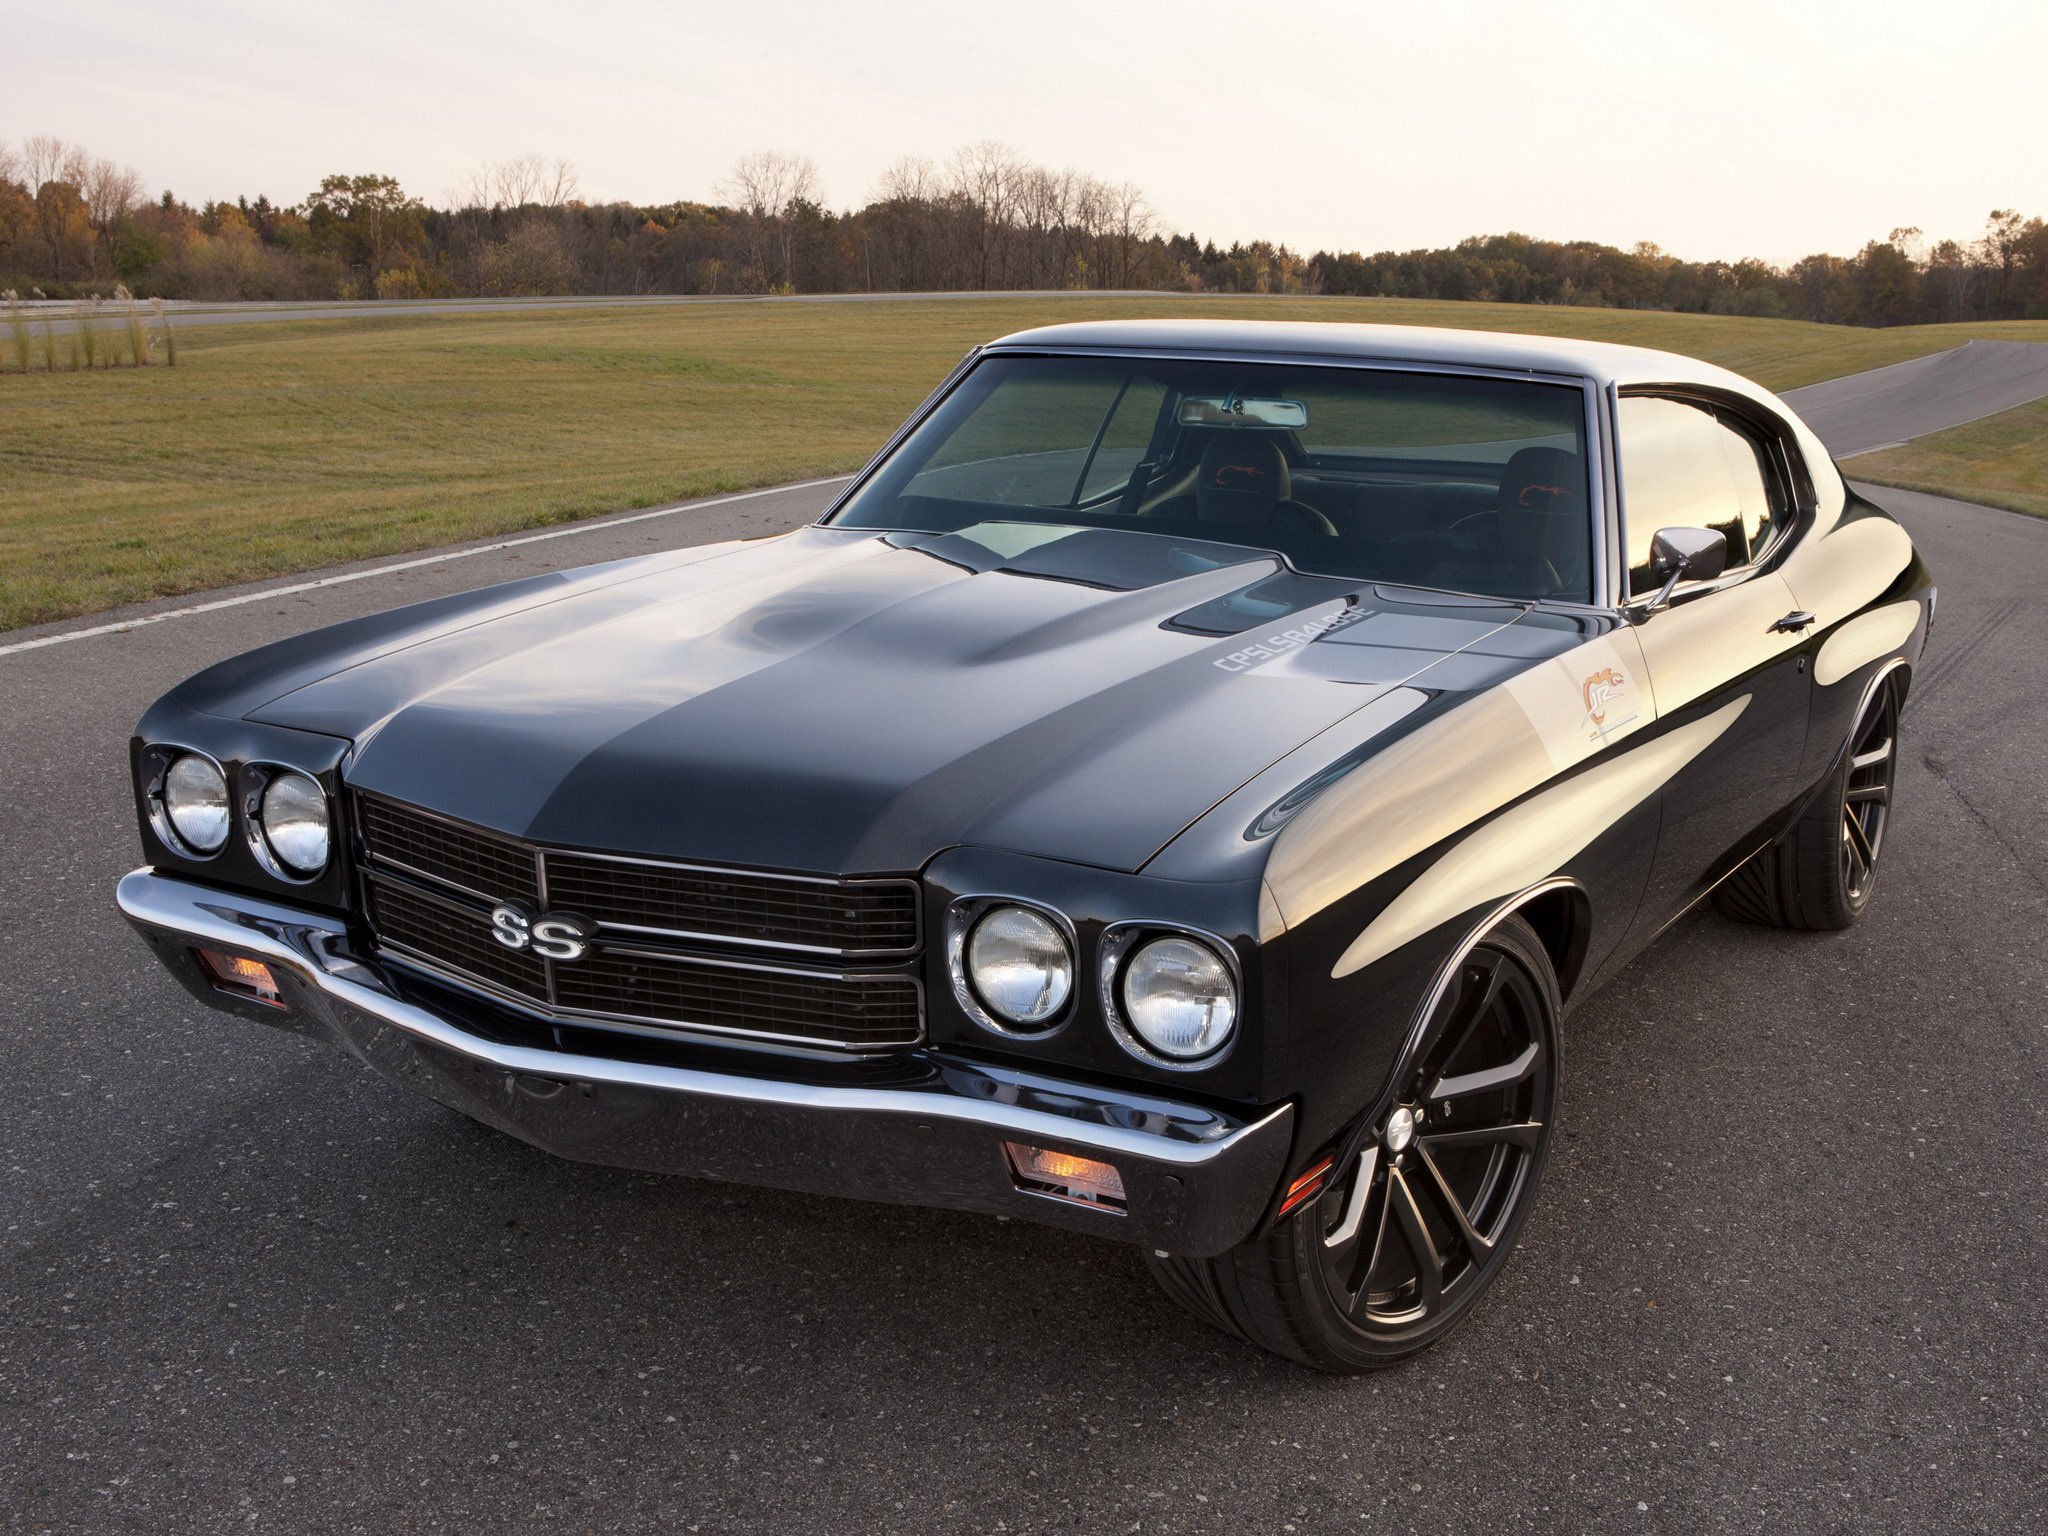 1969 Chevrolet Chevelle S S classic muscle hot rod rods wallpaper